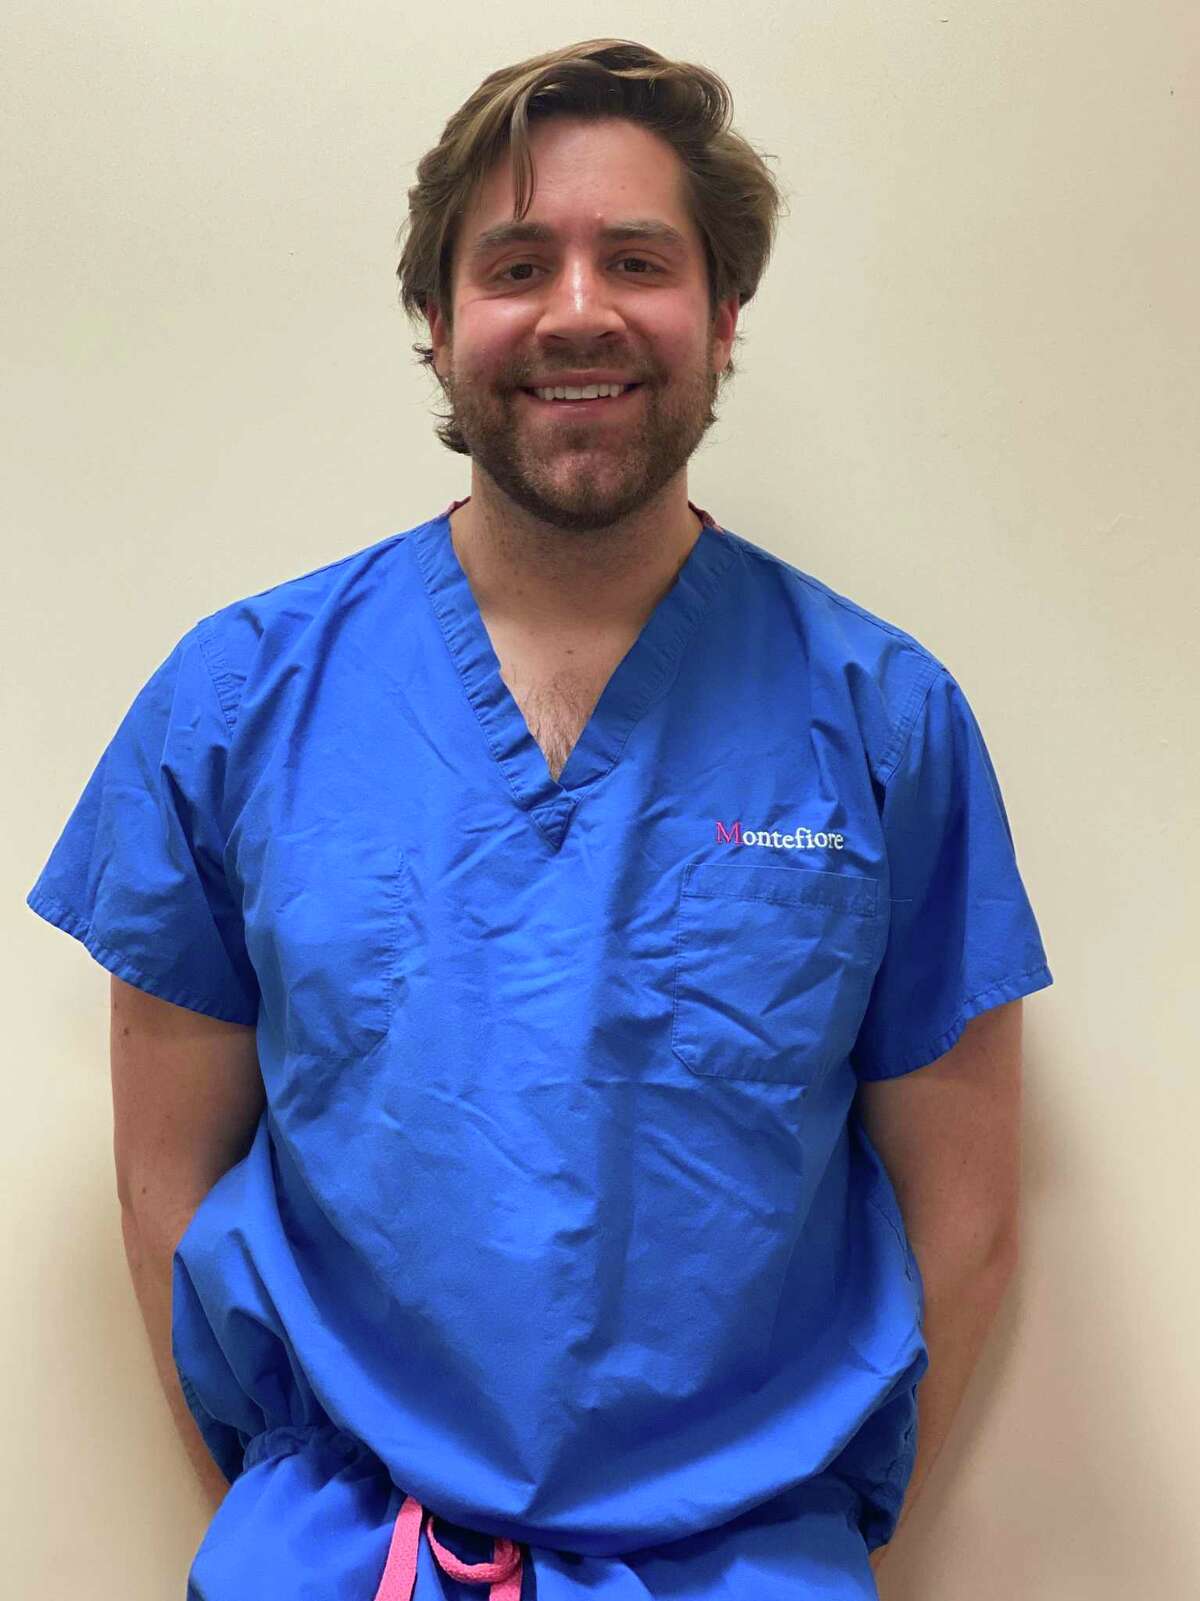 In the second year of his psychiatry residence, Ridgefield resident Ryan Flanagan was temporarily moved to a medical floor to help treat COVID-19 patients at Montefiore Medical Center in the Bronx.